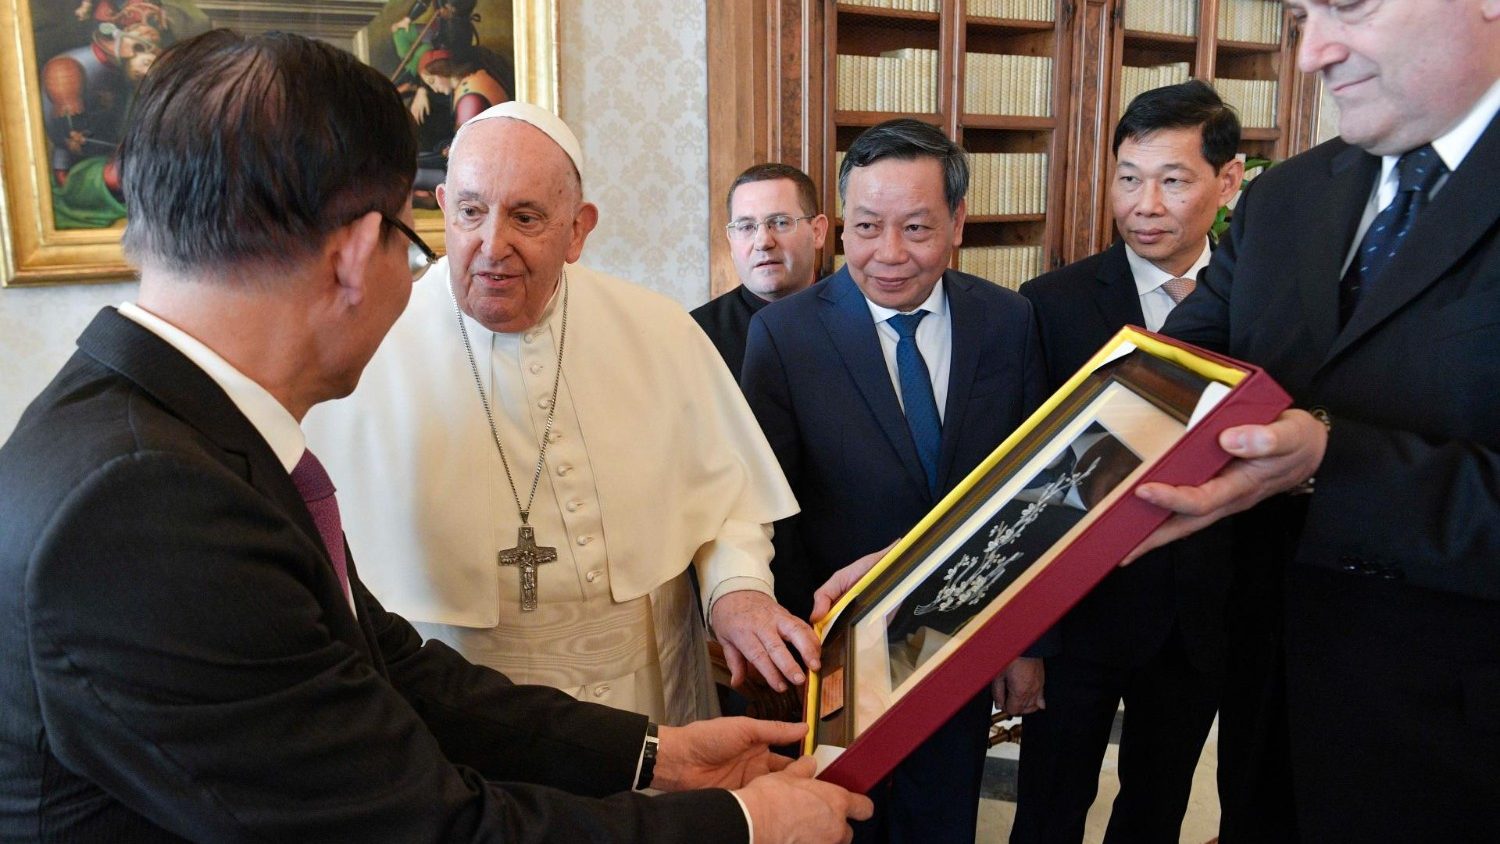 Vatican and Vietnam to take major step forward in relations